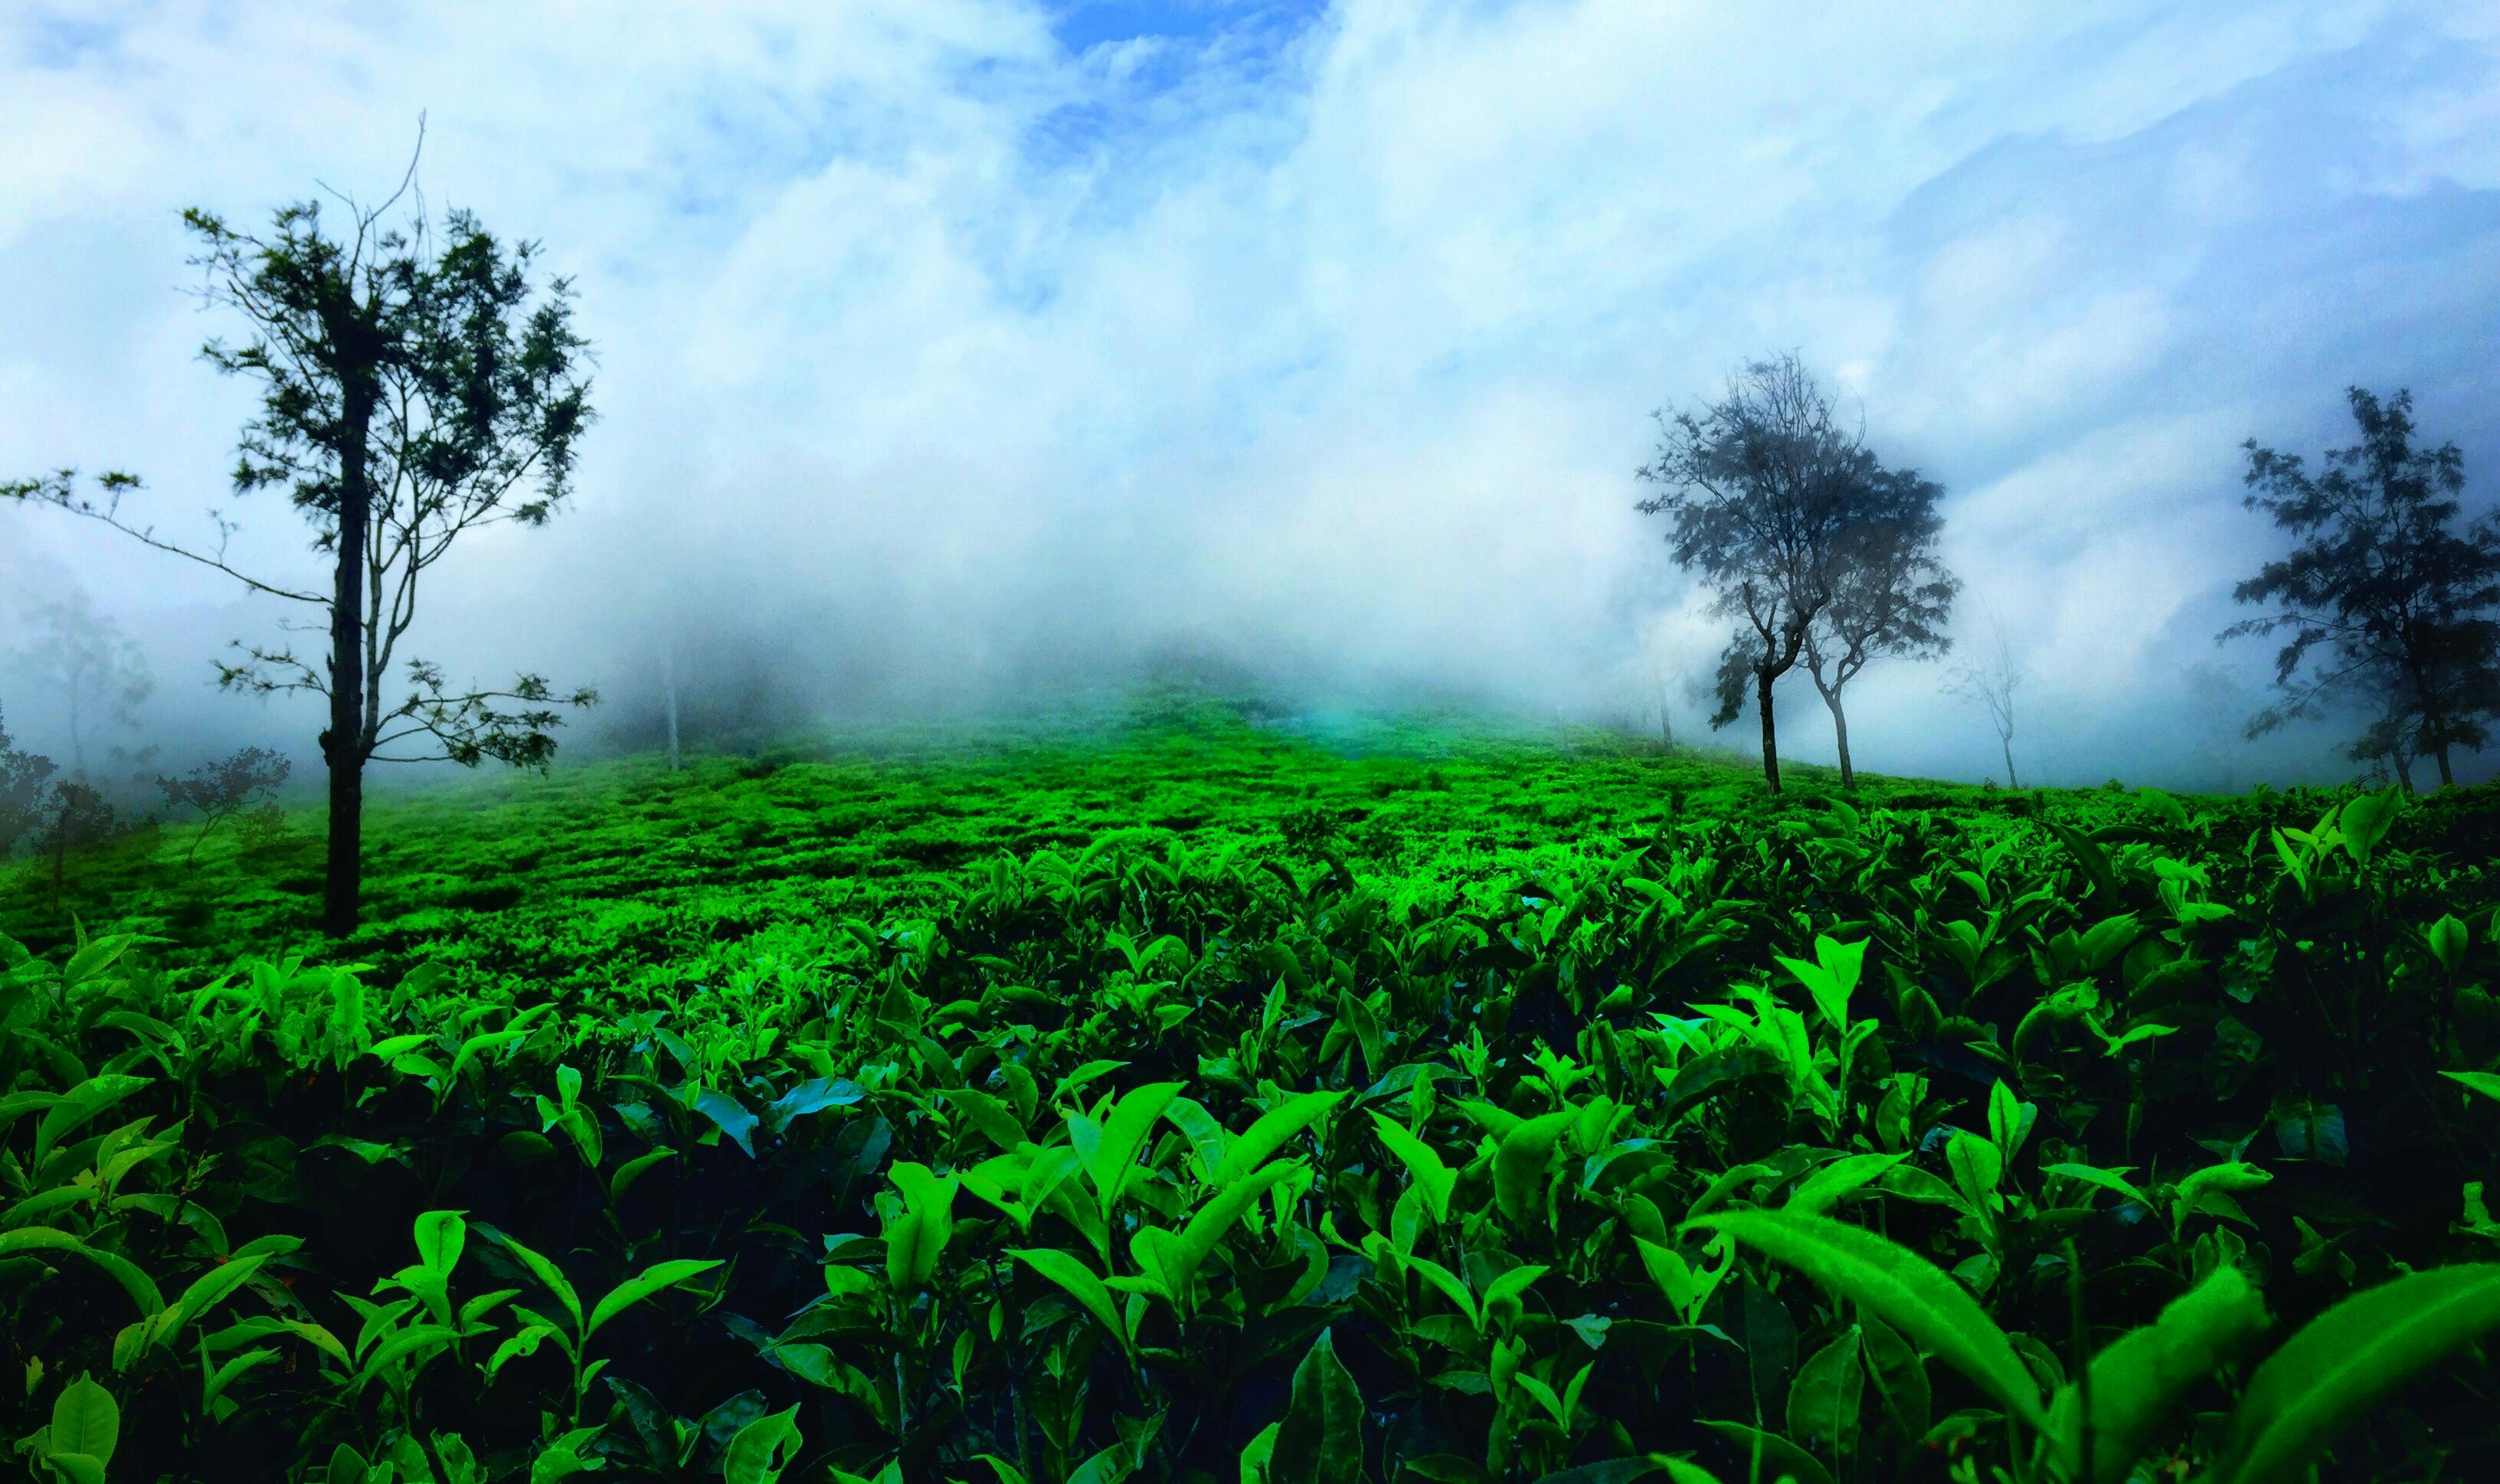 Free stock photo of #India #ooty #nature #green #clouds #mist #peace